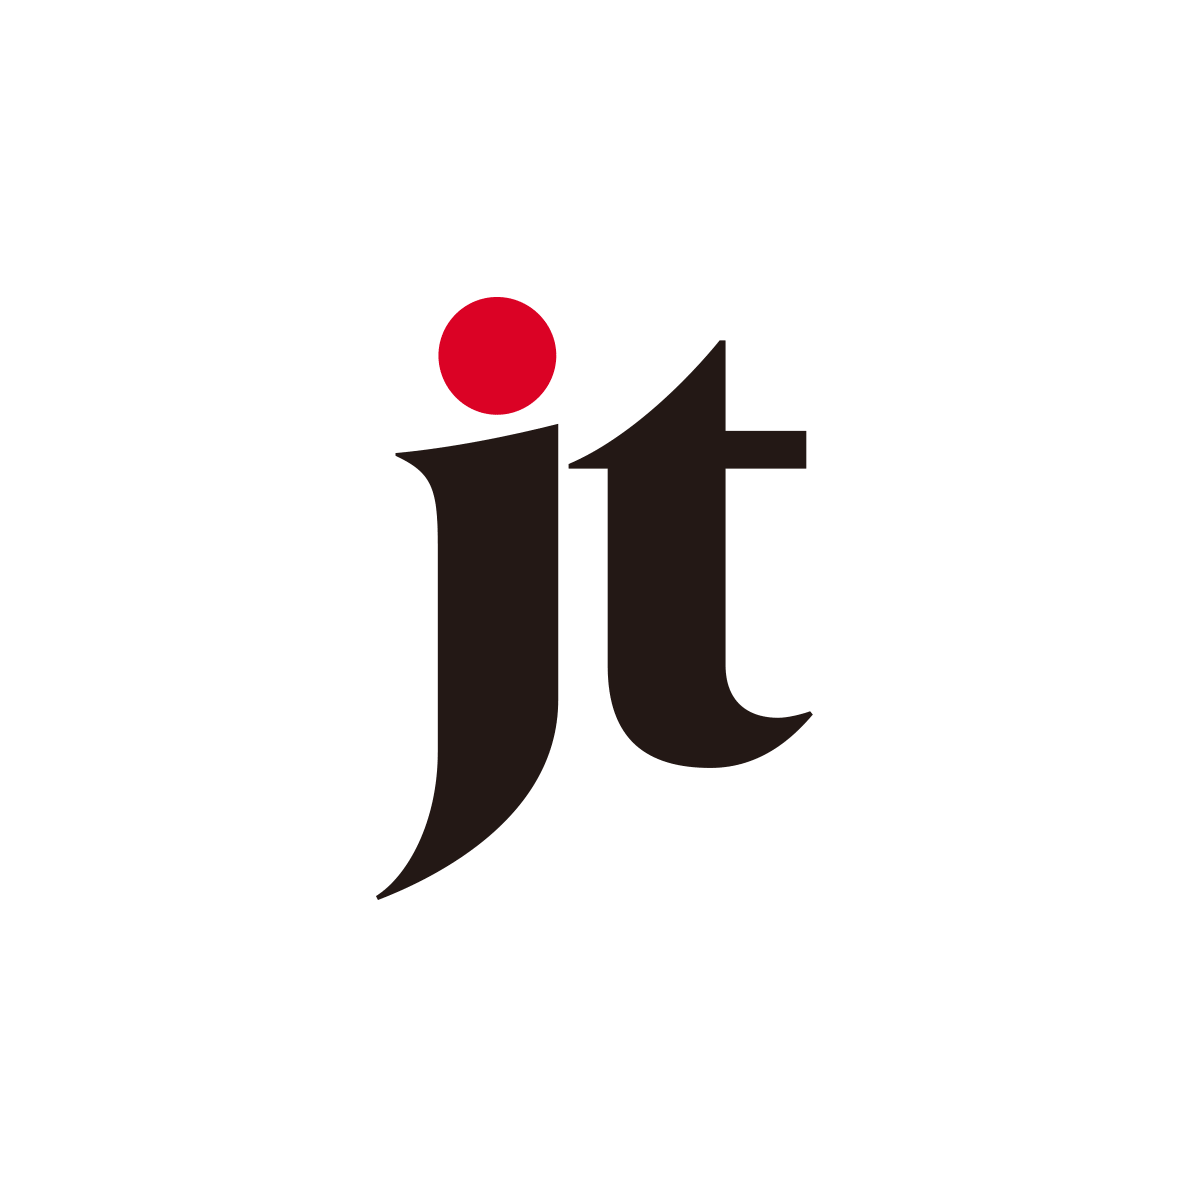 Data breaches exposed nearly 2.7 million morsels of personal info in Japan in 2018